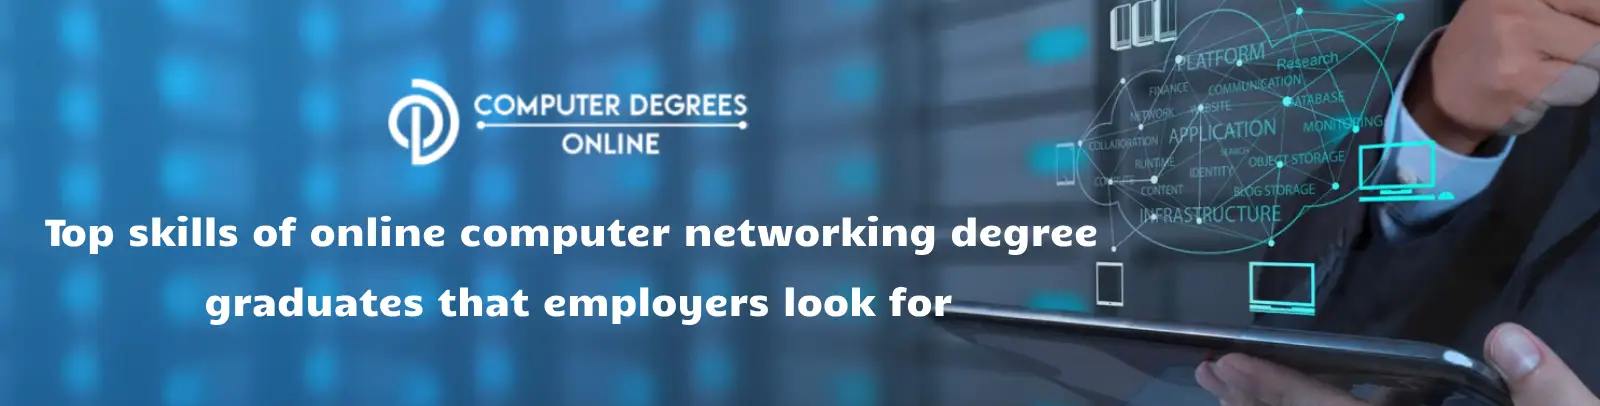 Top skills of online computer networking degree graduates that employers look for